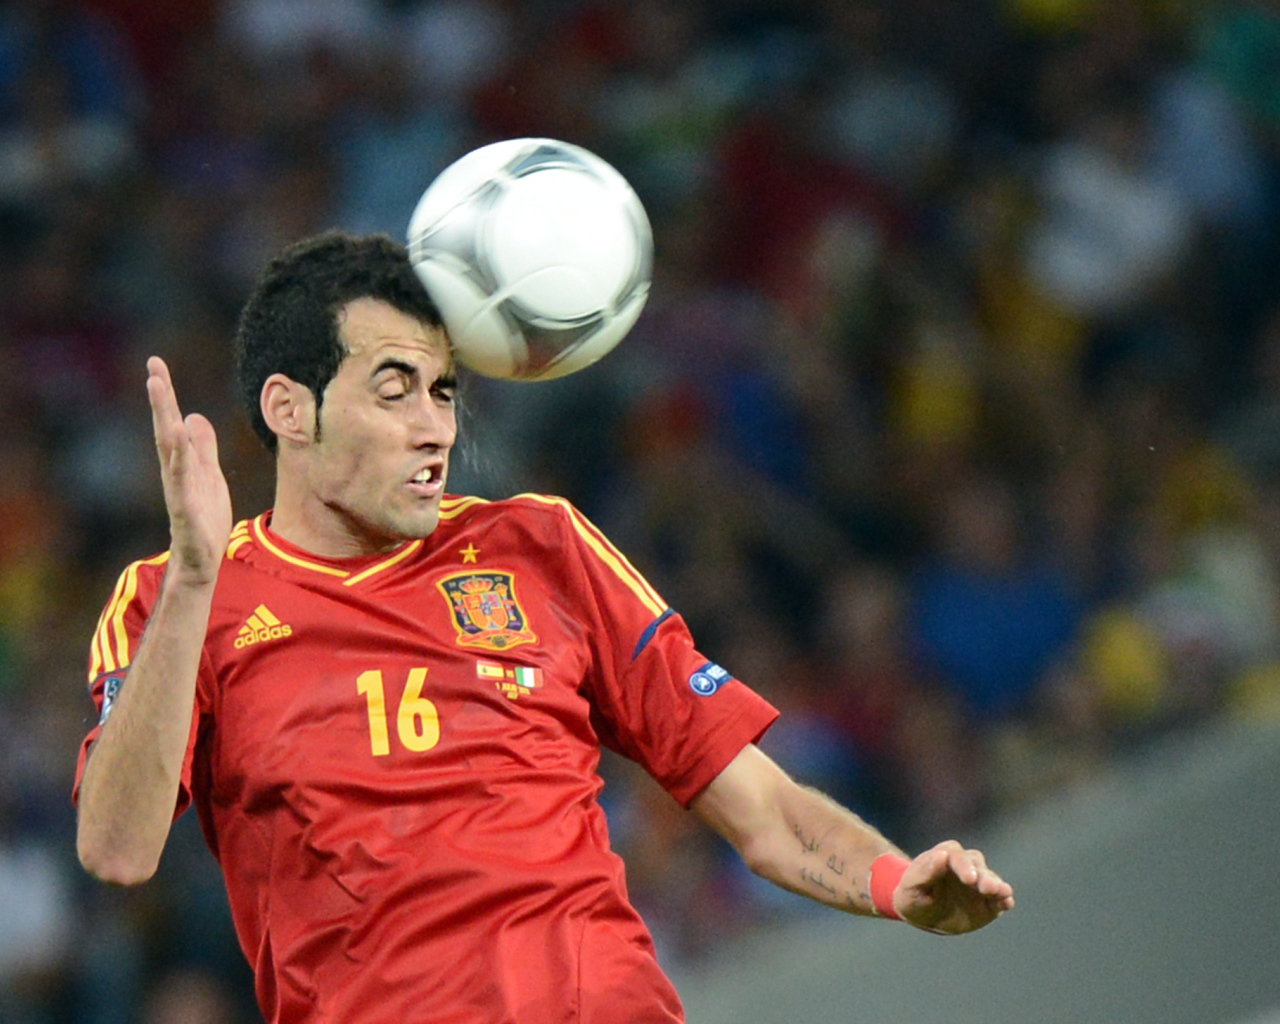 The best football player of Barcelona Sergio Busquets strikes with his head